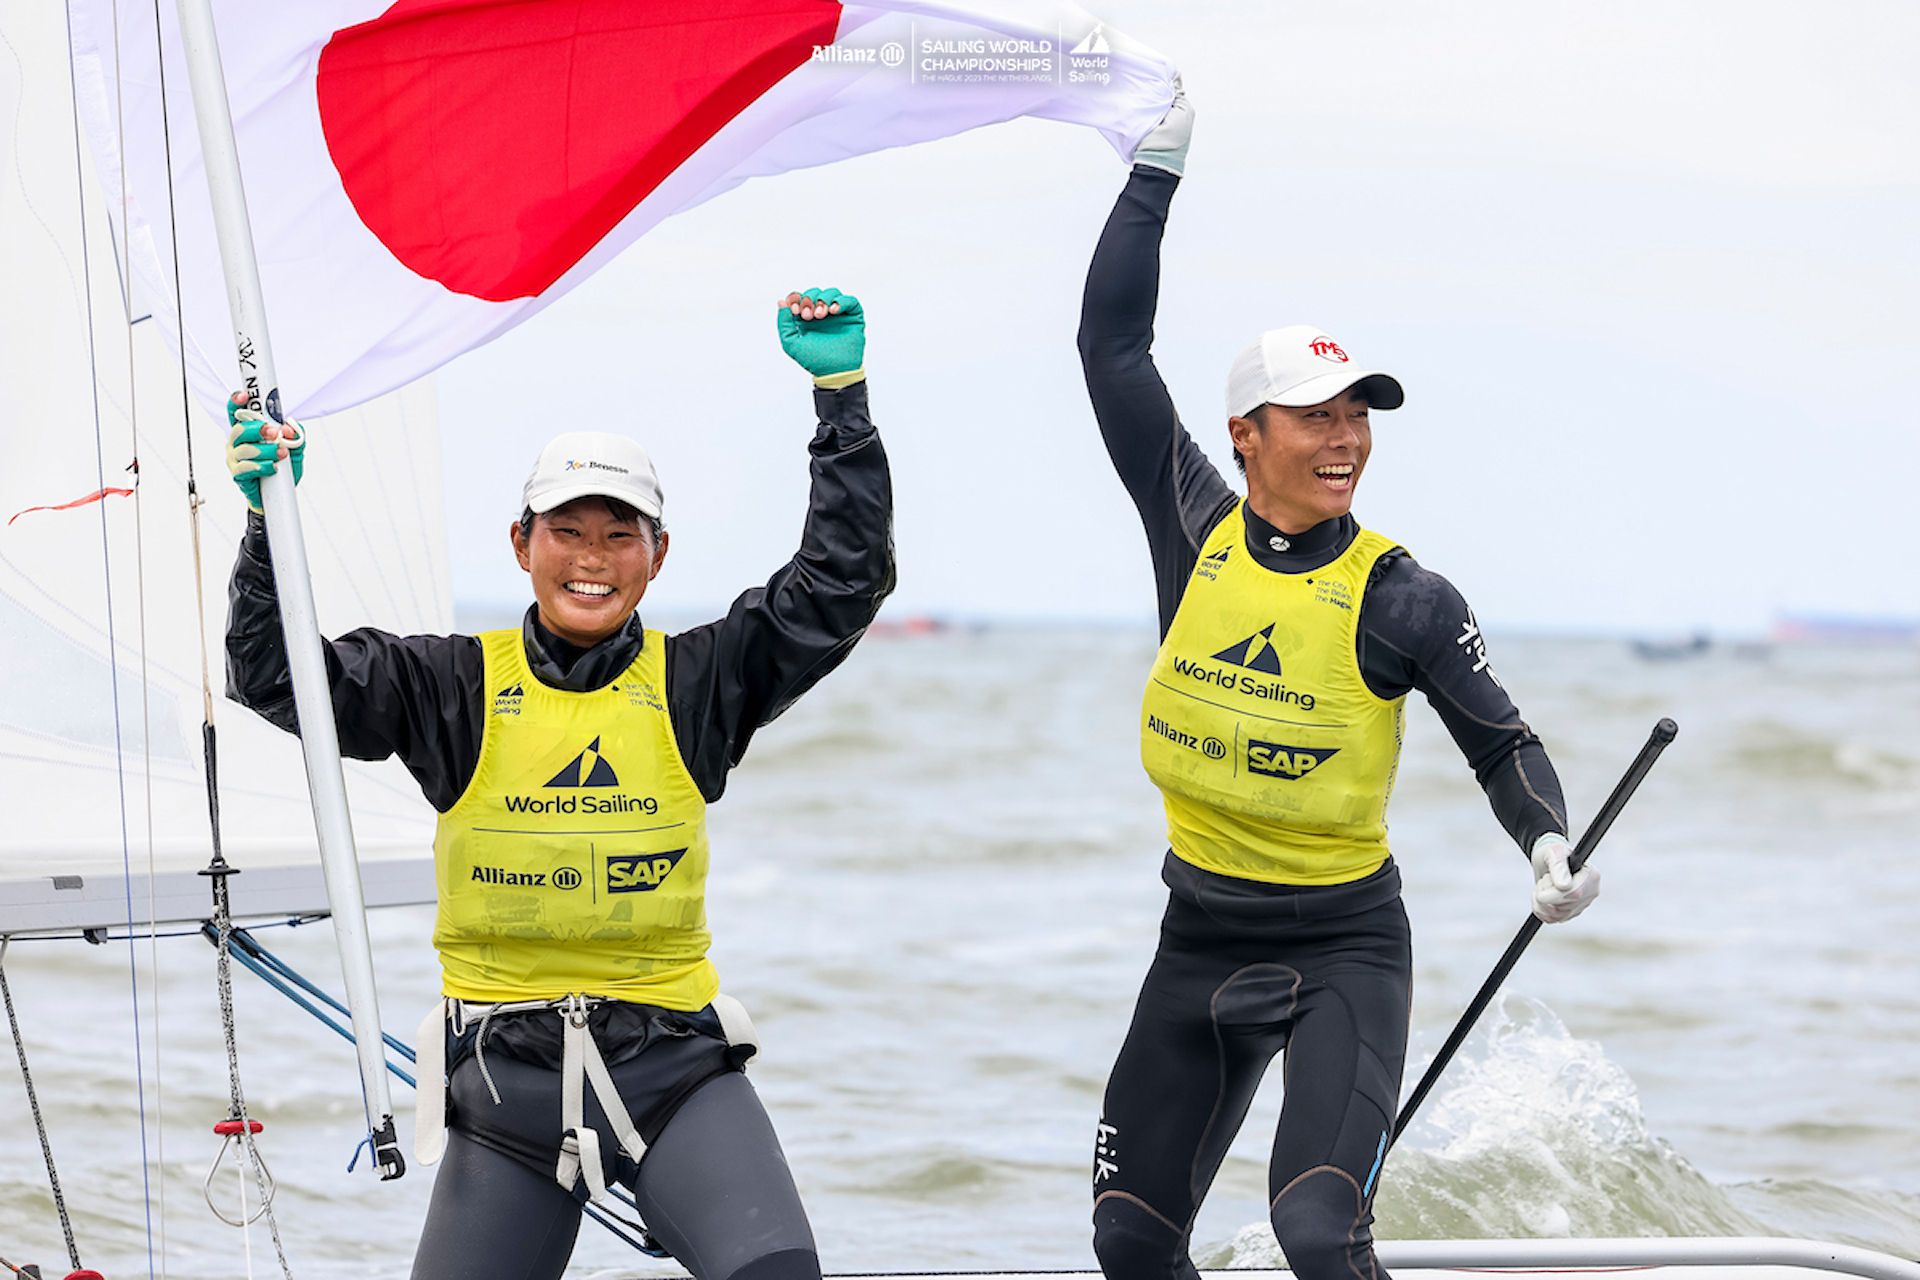 WINNERS CROWNED AT 2023 ALLIANZ SAILING WORLD CHAMPIONSHIPS